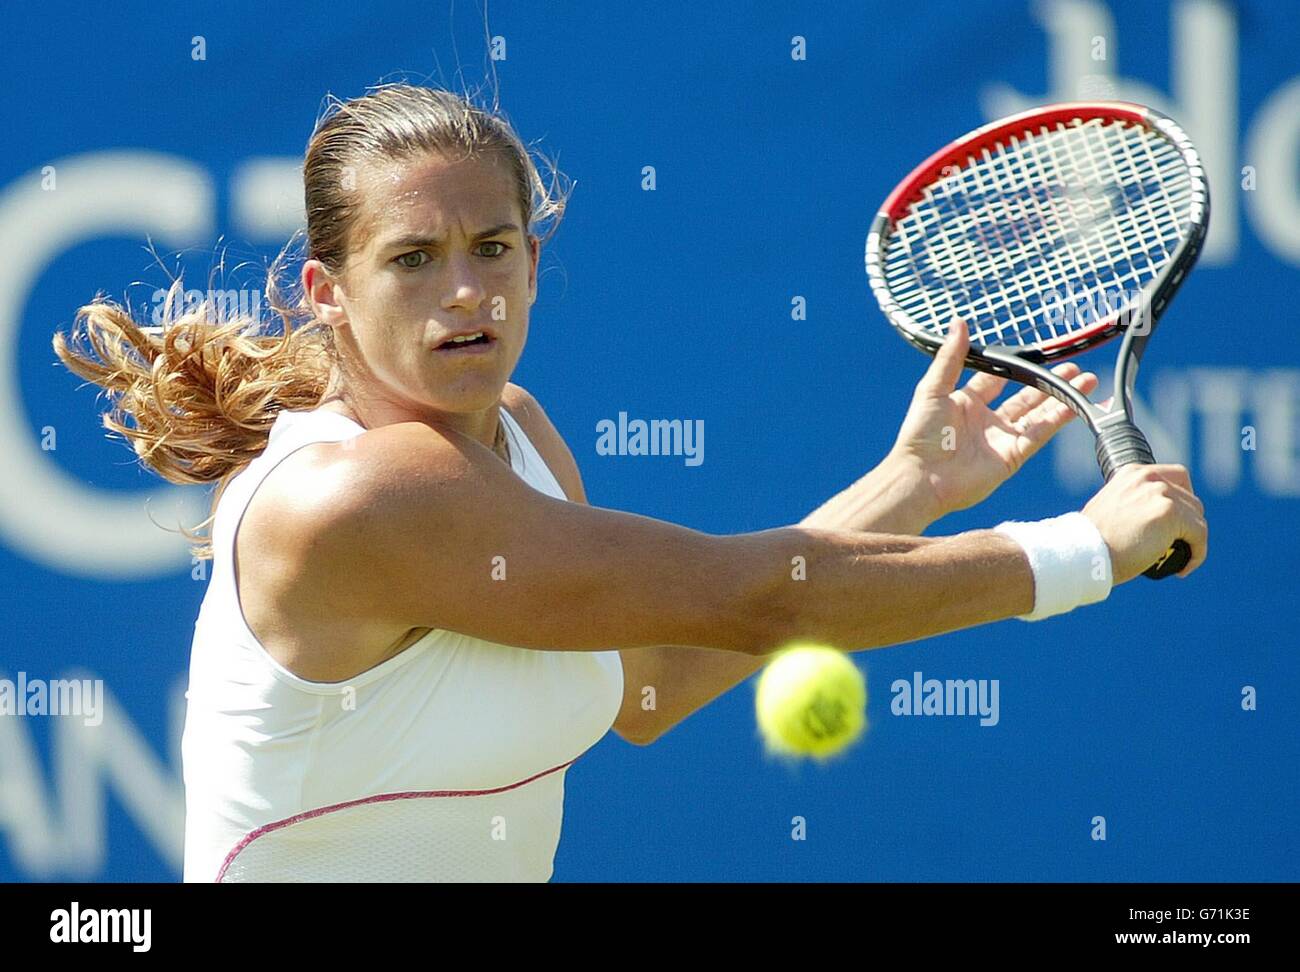 Amelie Mauresmo of France in action against Great Britain's Amanda Janes  during the Hastings Direct International Championships in Eastbourne, West  Sussex, Wednesday June 16, 2004. Mauresmo won in straight sets 6:4, 6:2  Stock Photo - Alamy